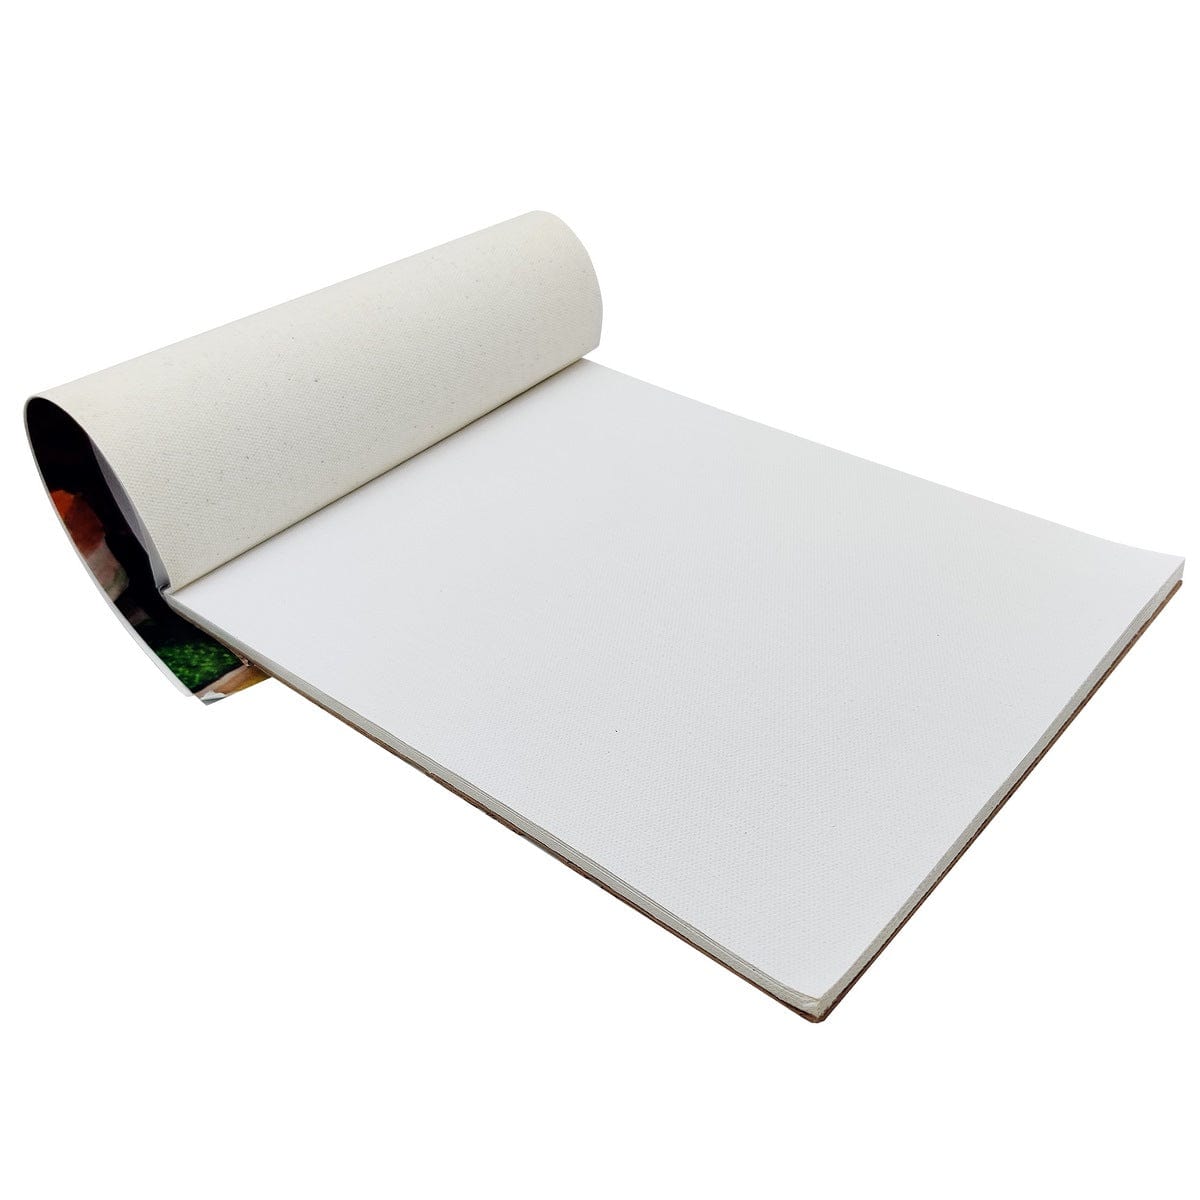 Premium Artist Canvas Pad - A5 Size (5.8X8.3 IN) - 10 SHEETS